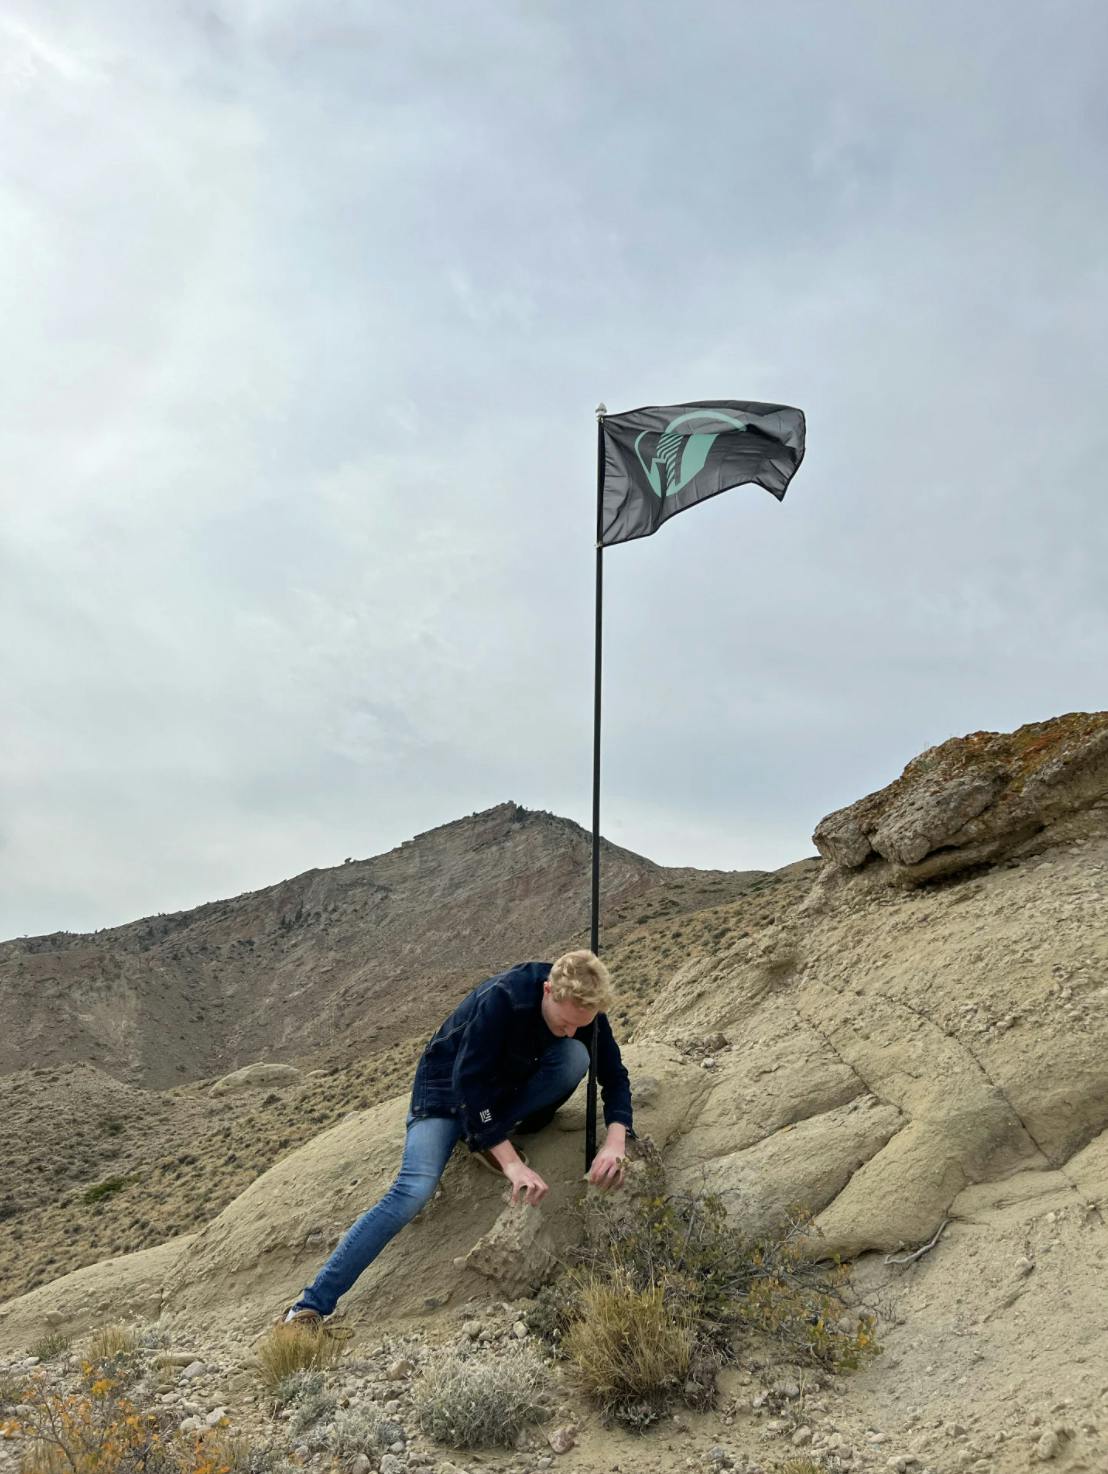 Scott Fitsimones earlier this year (2021) planting the CityDAO flag on the first plot of land formally acquired by a DAO in history. The 40 acre parcel in Wyoming served as proof of concept of DAOs ability to own meatspace assets, taking advantage of the novel Wyoming DAO Law. Image: CityDAO